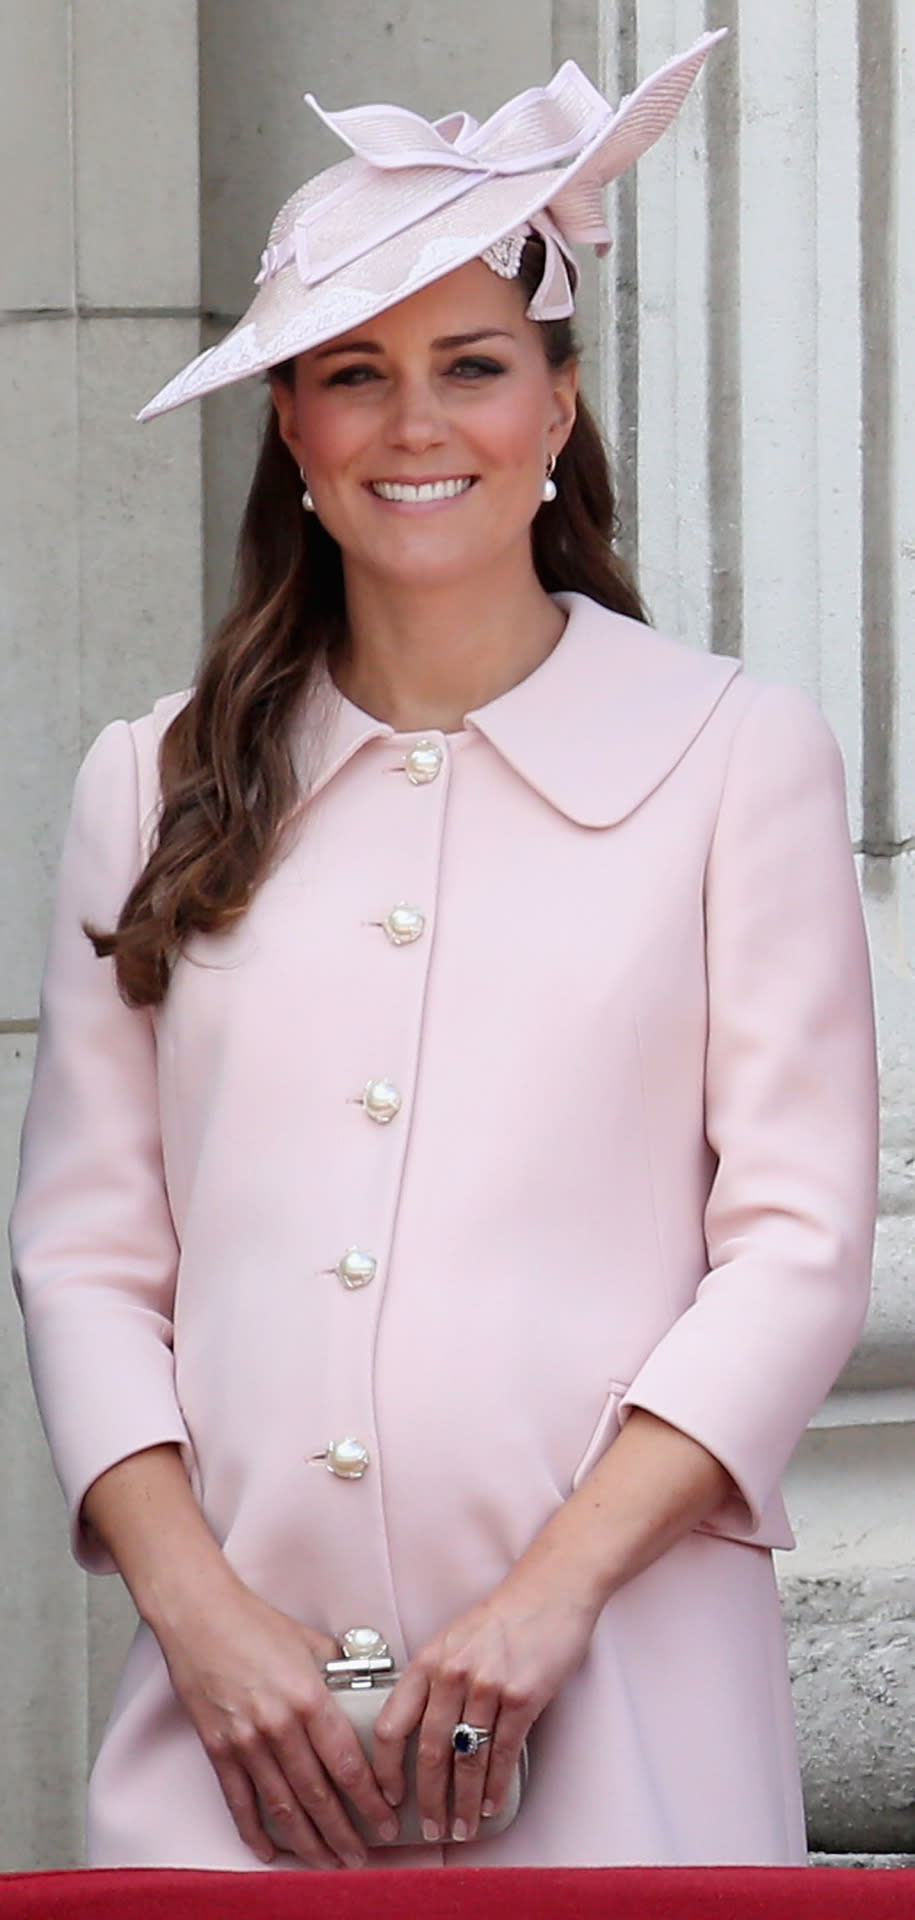 To celebrate the Queen’s birthday, the Duchess wore one of her favotire colors in a trusted silhouette.